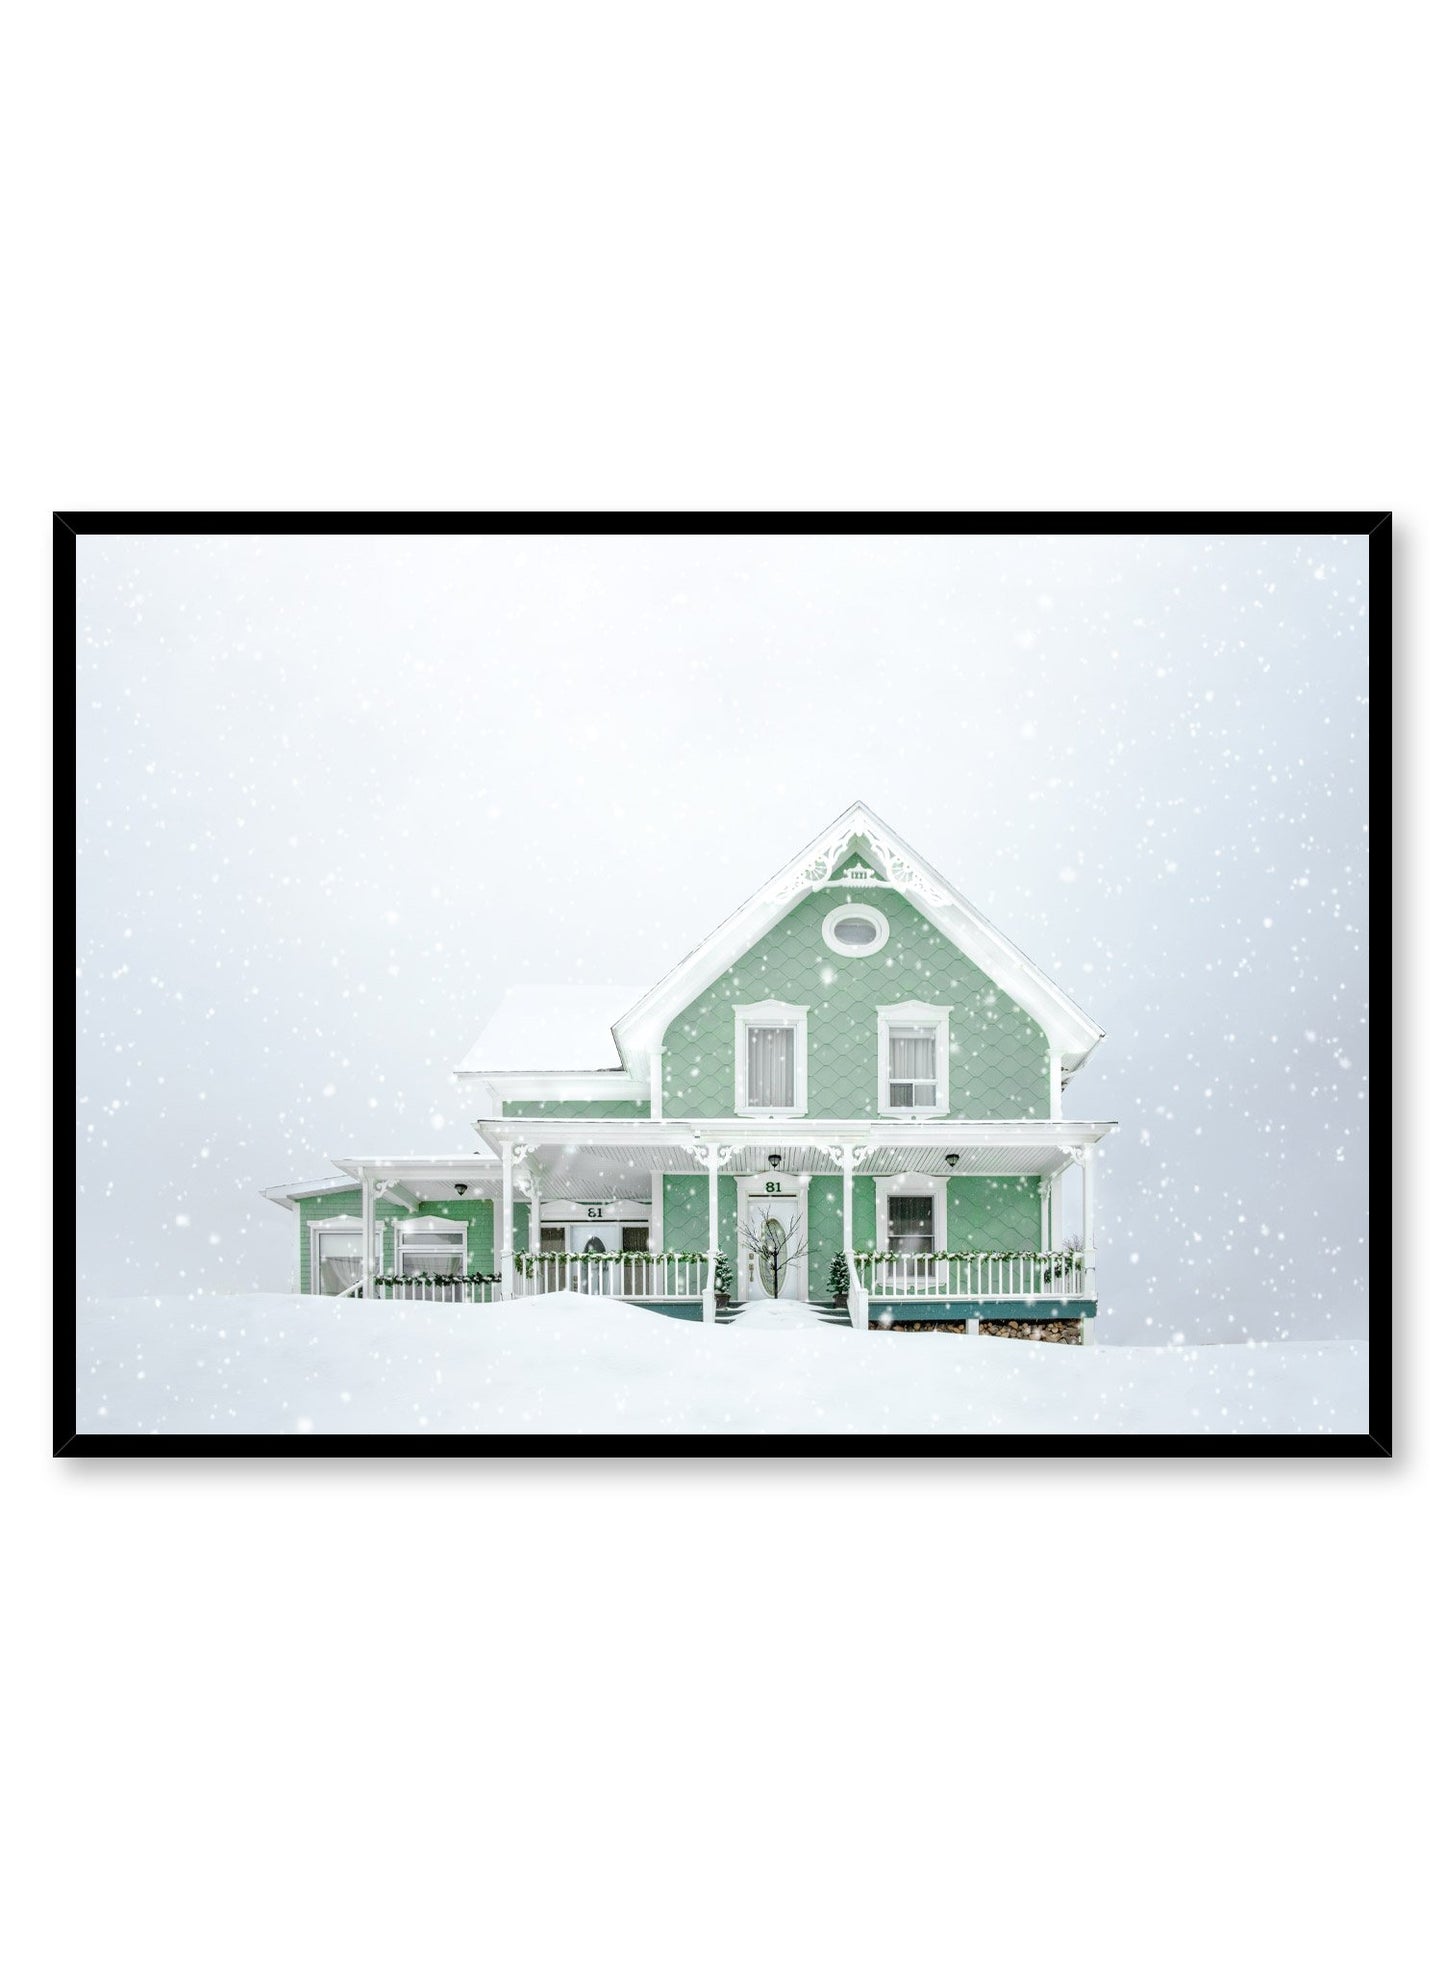 Minimalist design poster by Opposite Wall with photography of green home in white winter snow